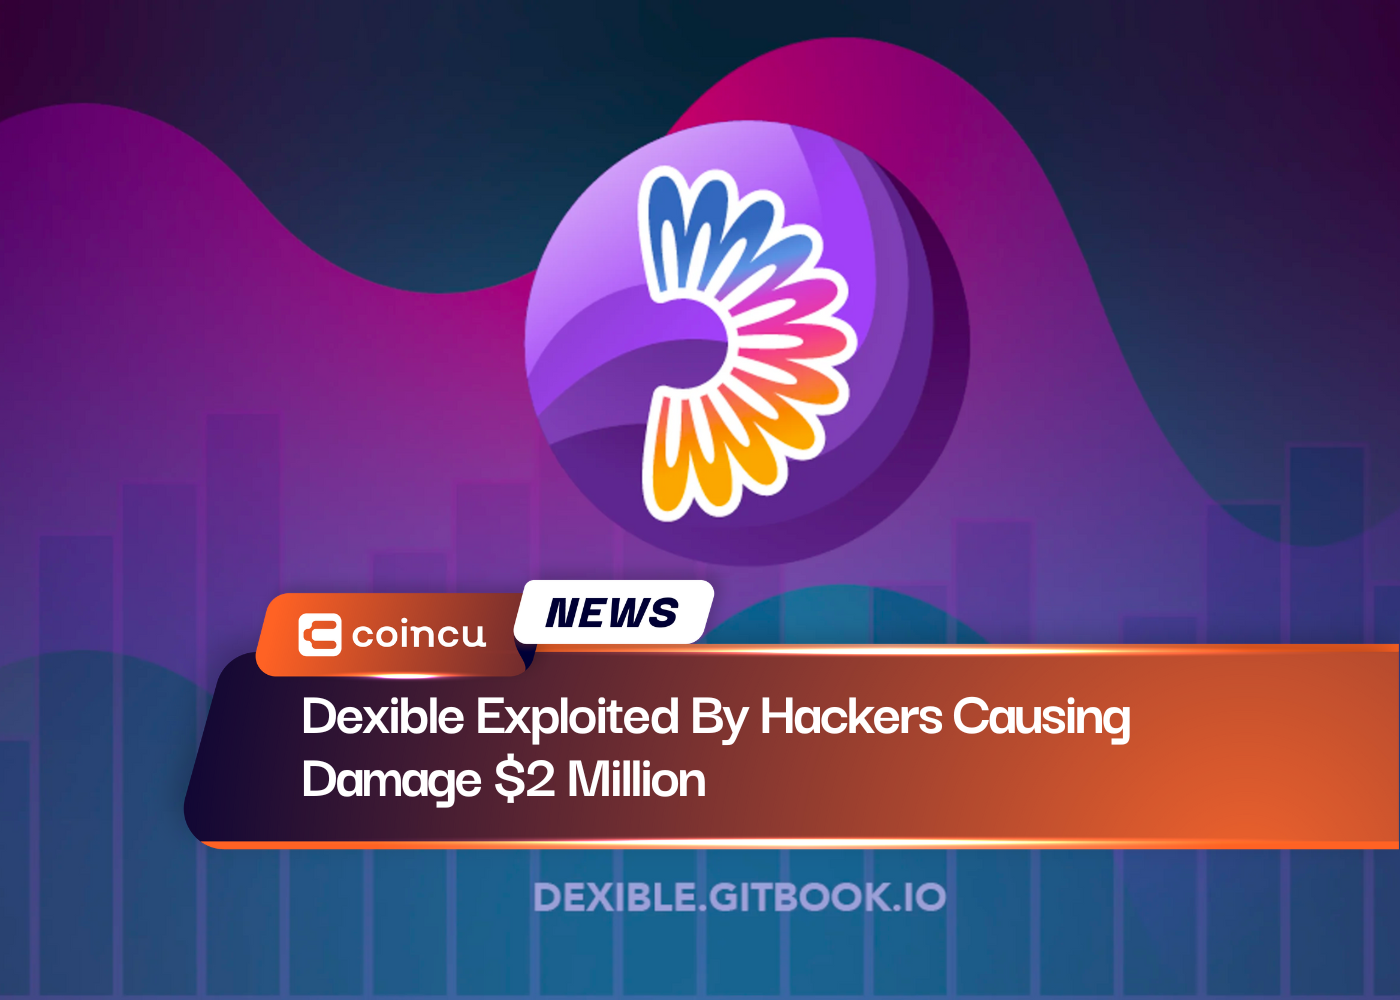 Dexible Exploited By Hackers Causing Damage $2 Million